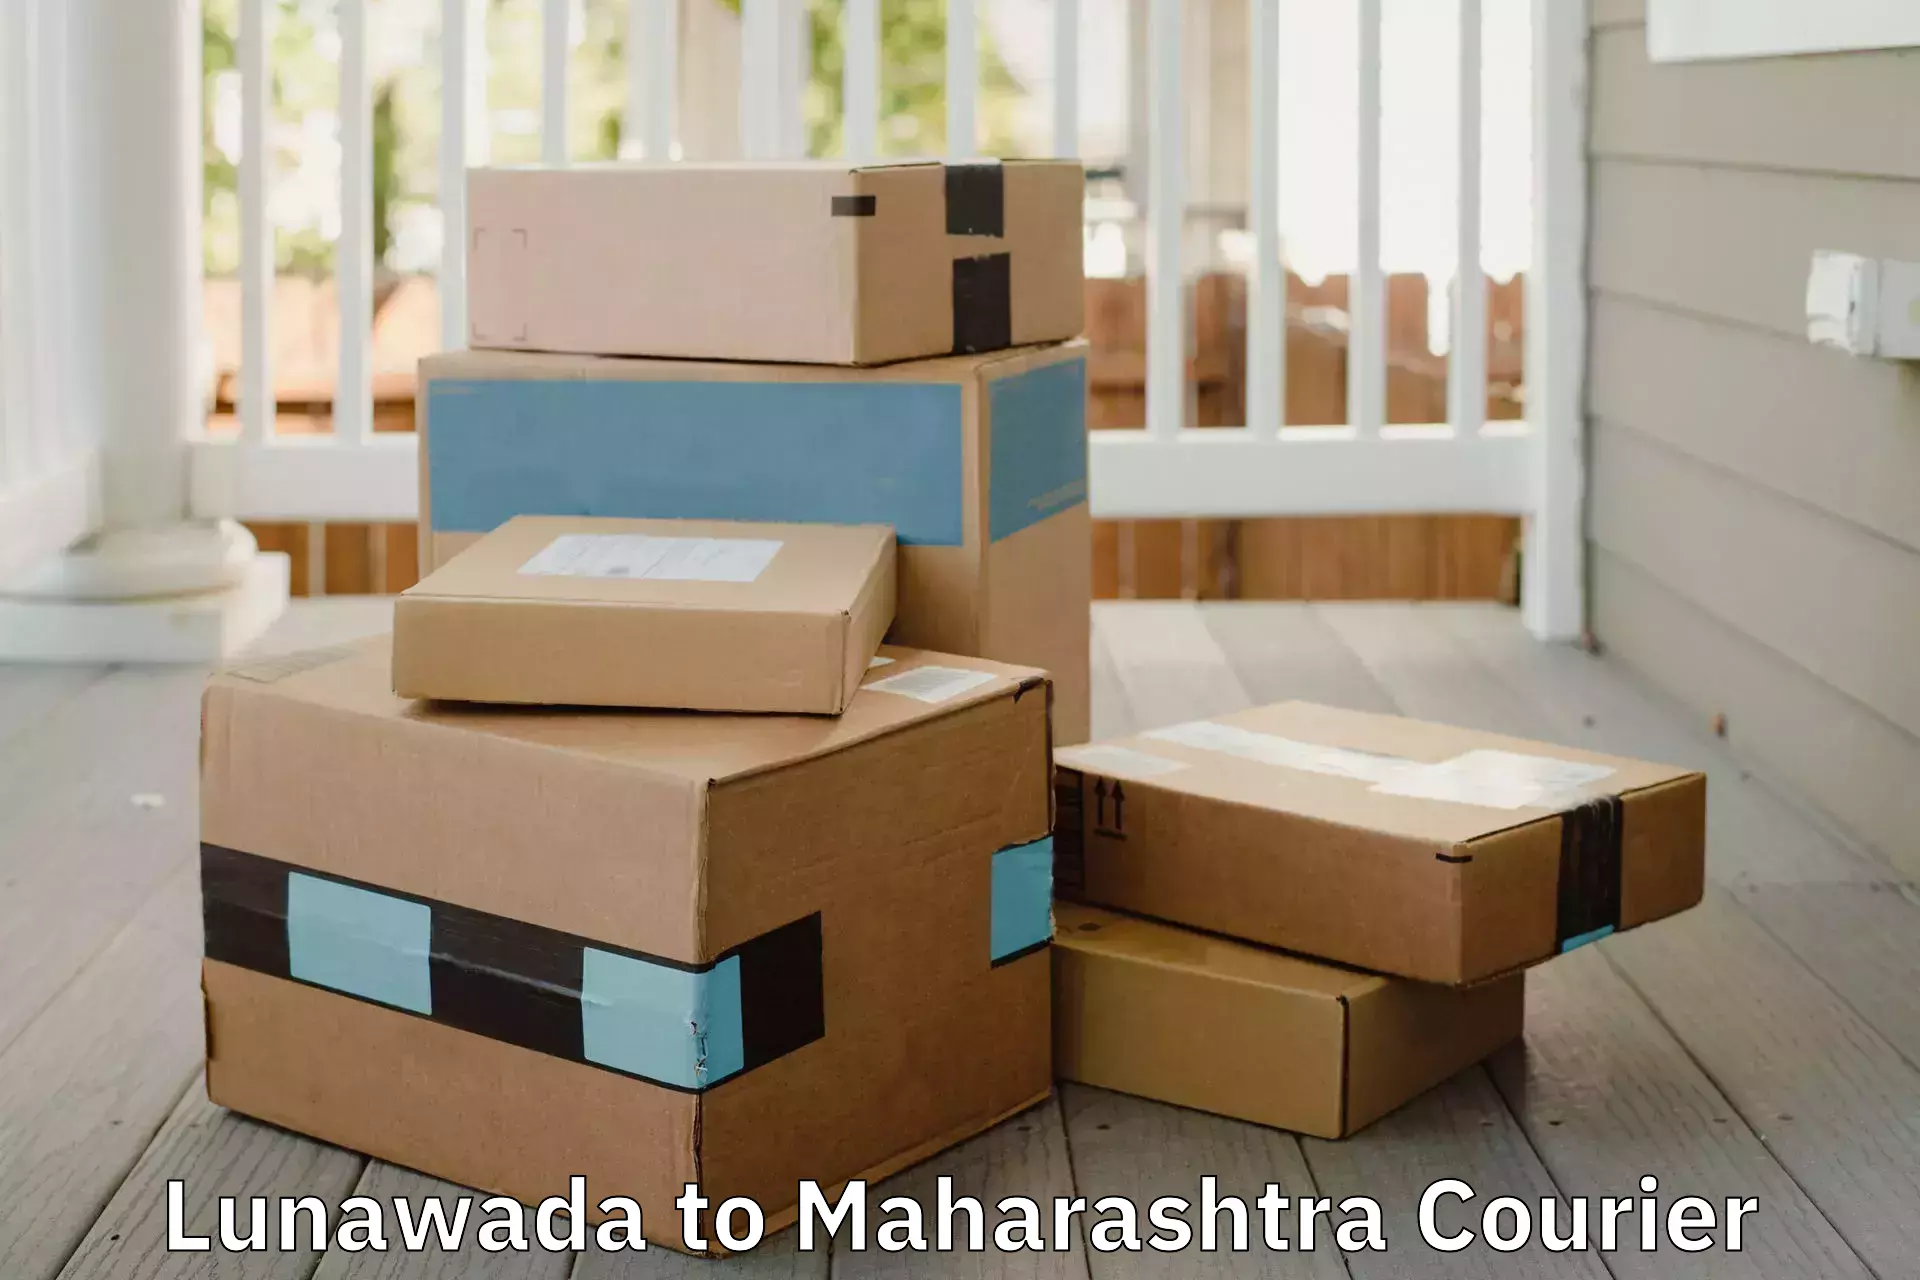 Trusted moving company Lunawada to Vasai